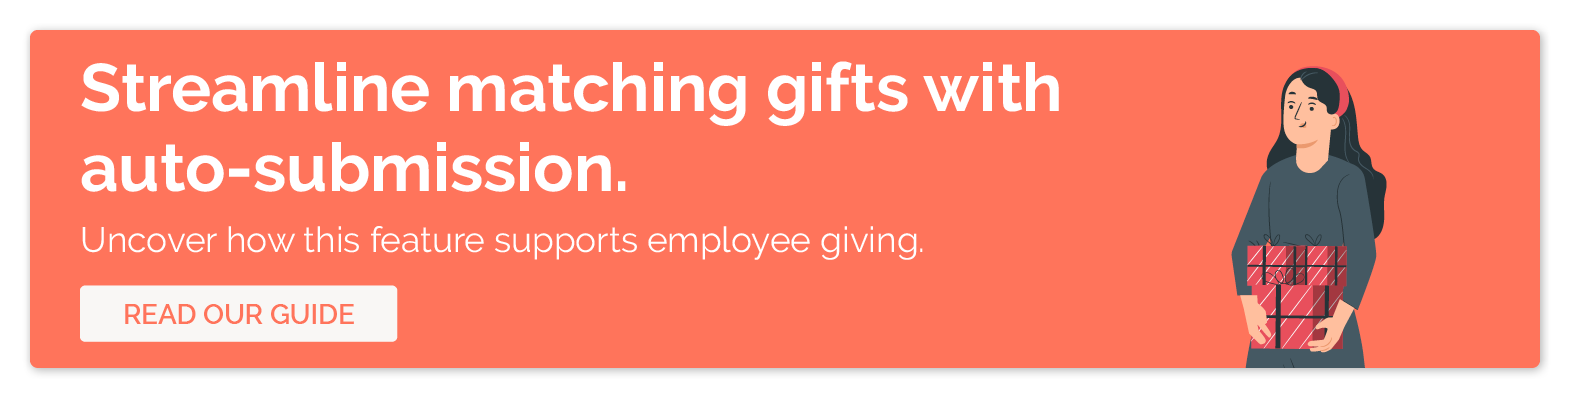 Click to learn more about matching gift auto-submission and how it integrates with corporate giving software to improve employee engagement.